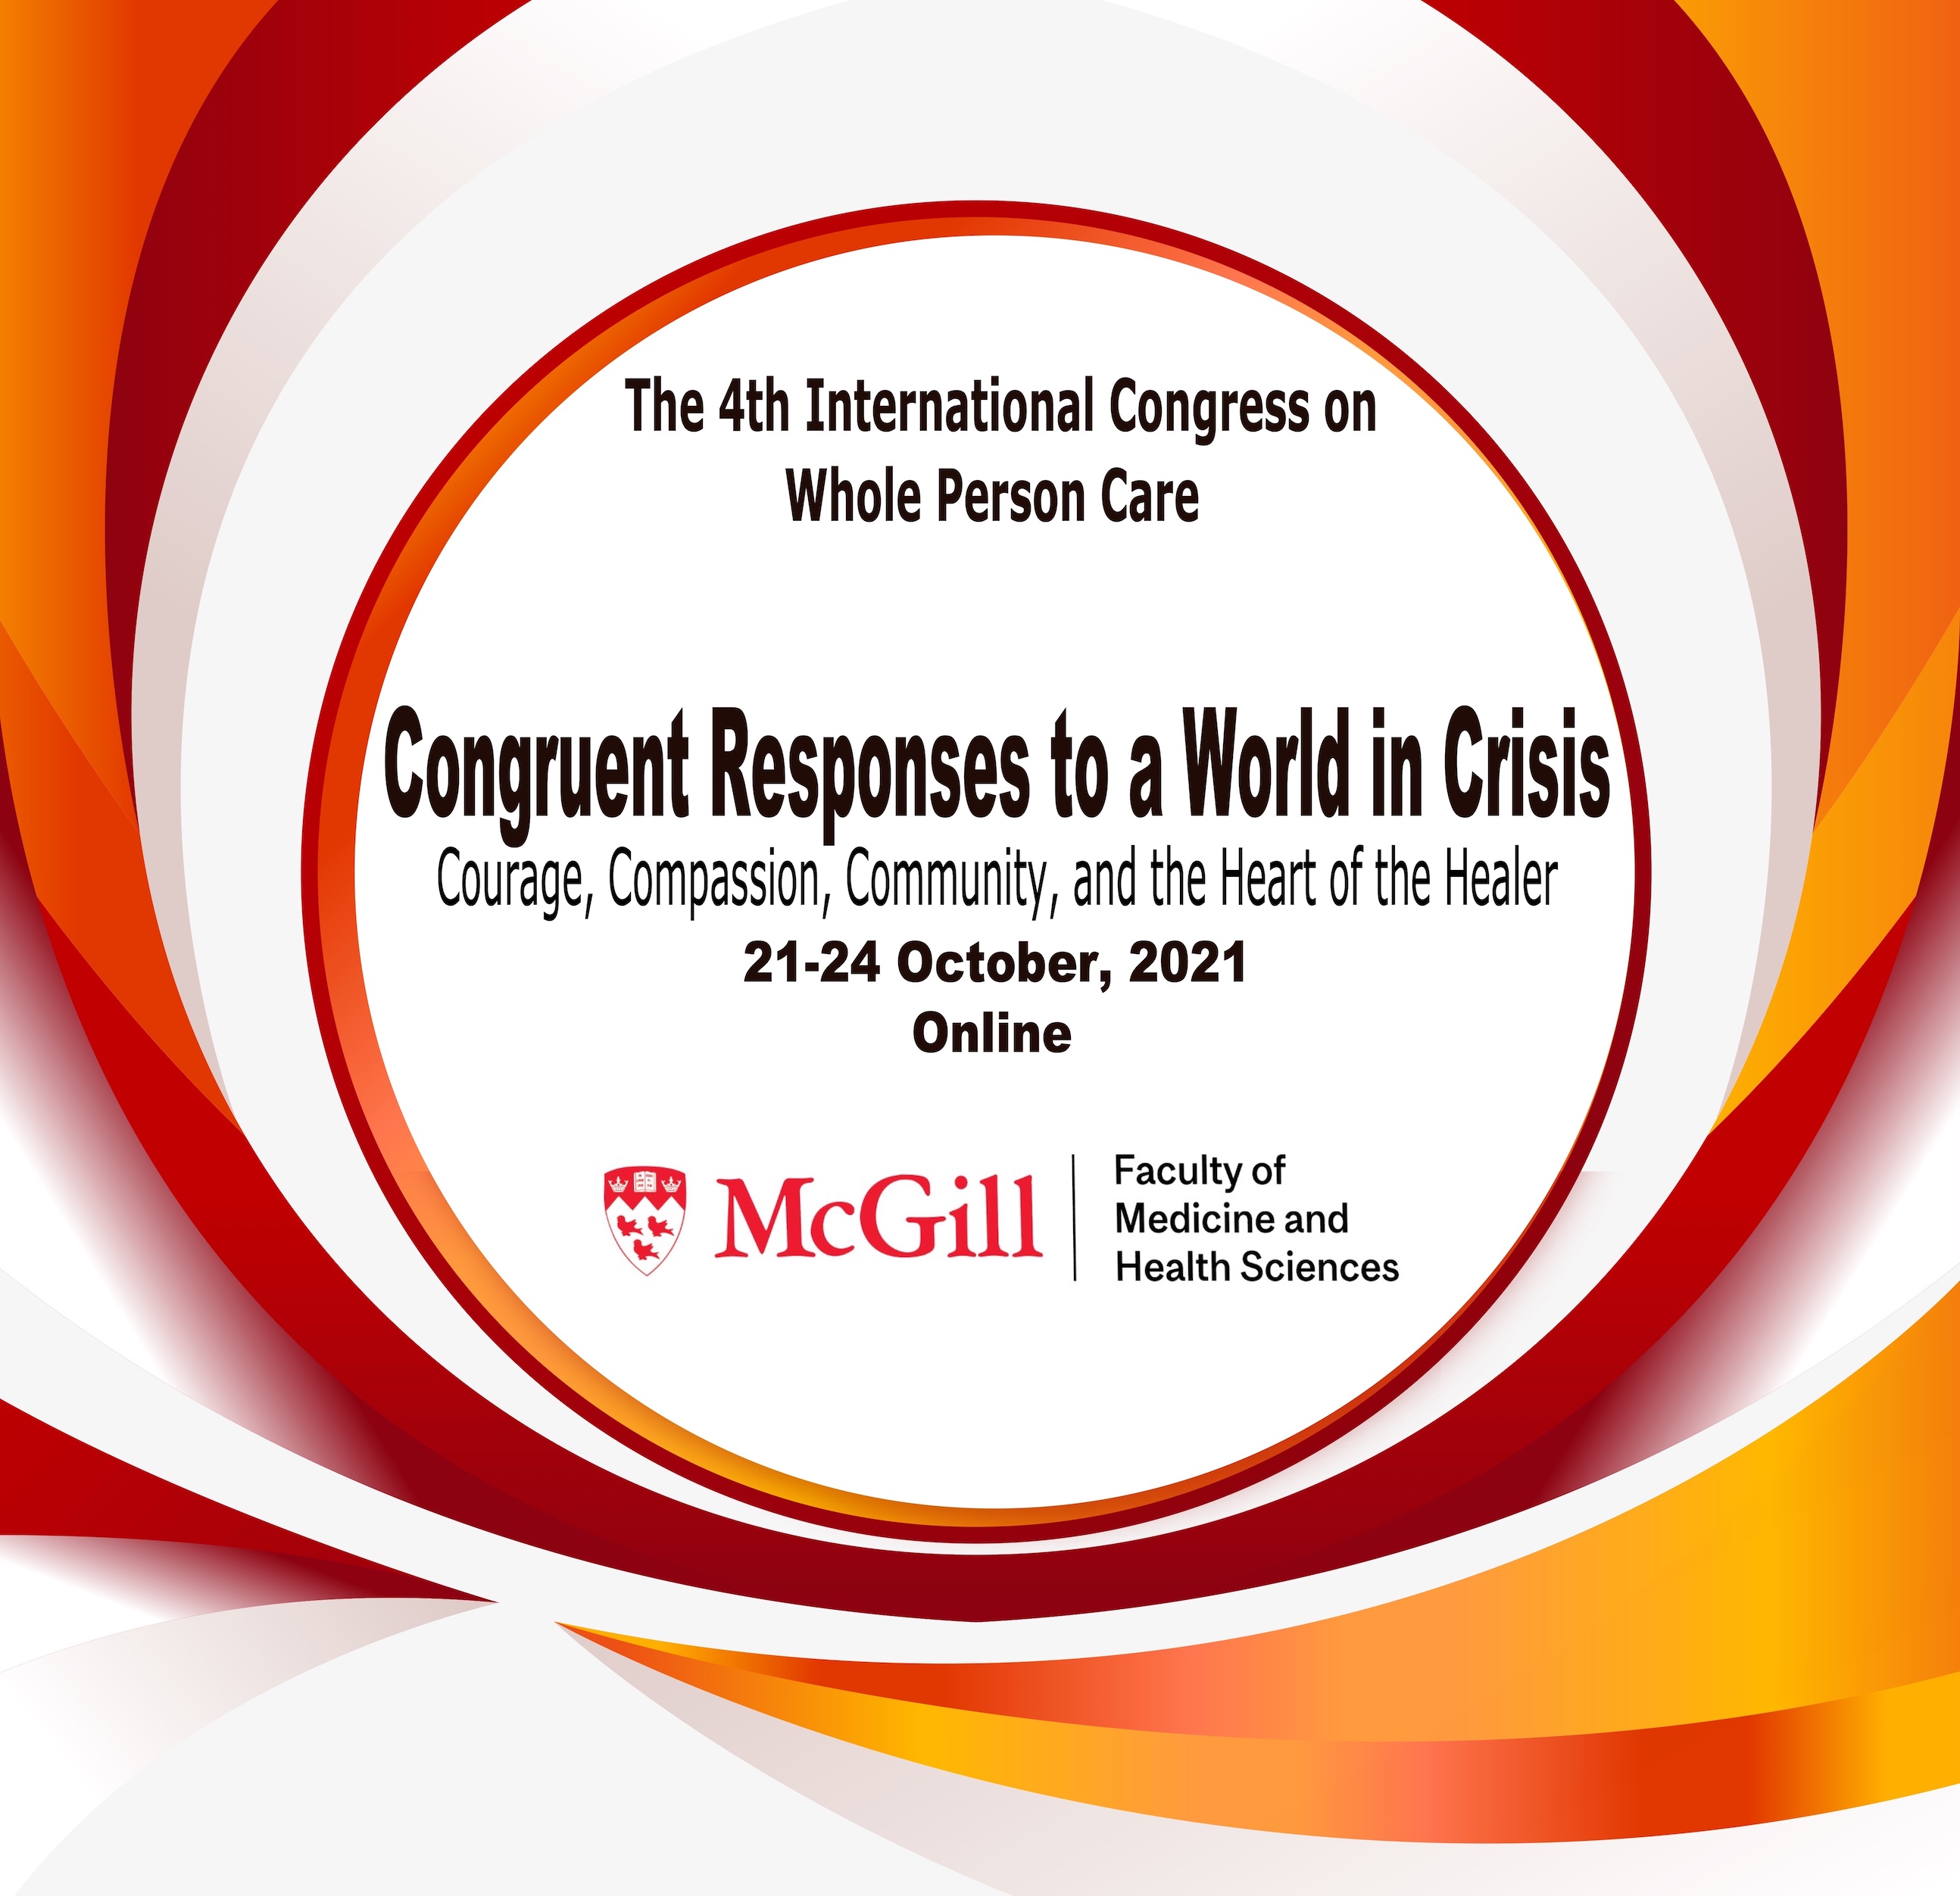 The 4th International Congress on Whole Person Care